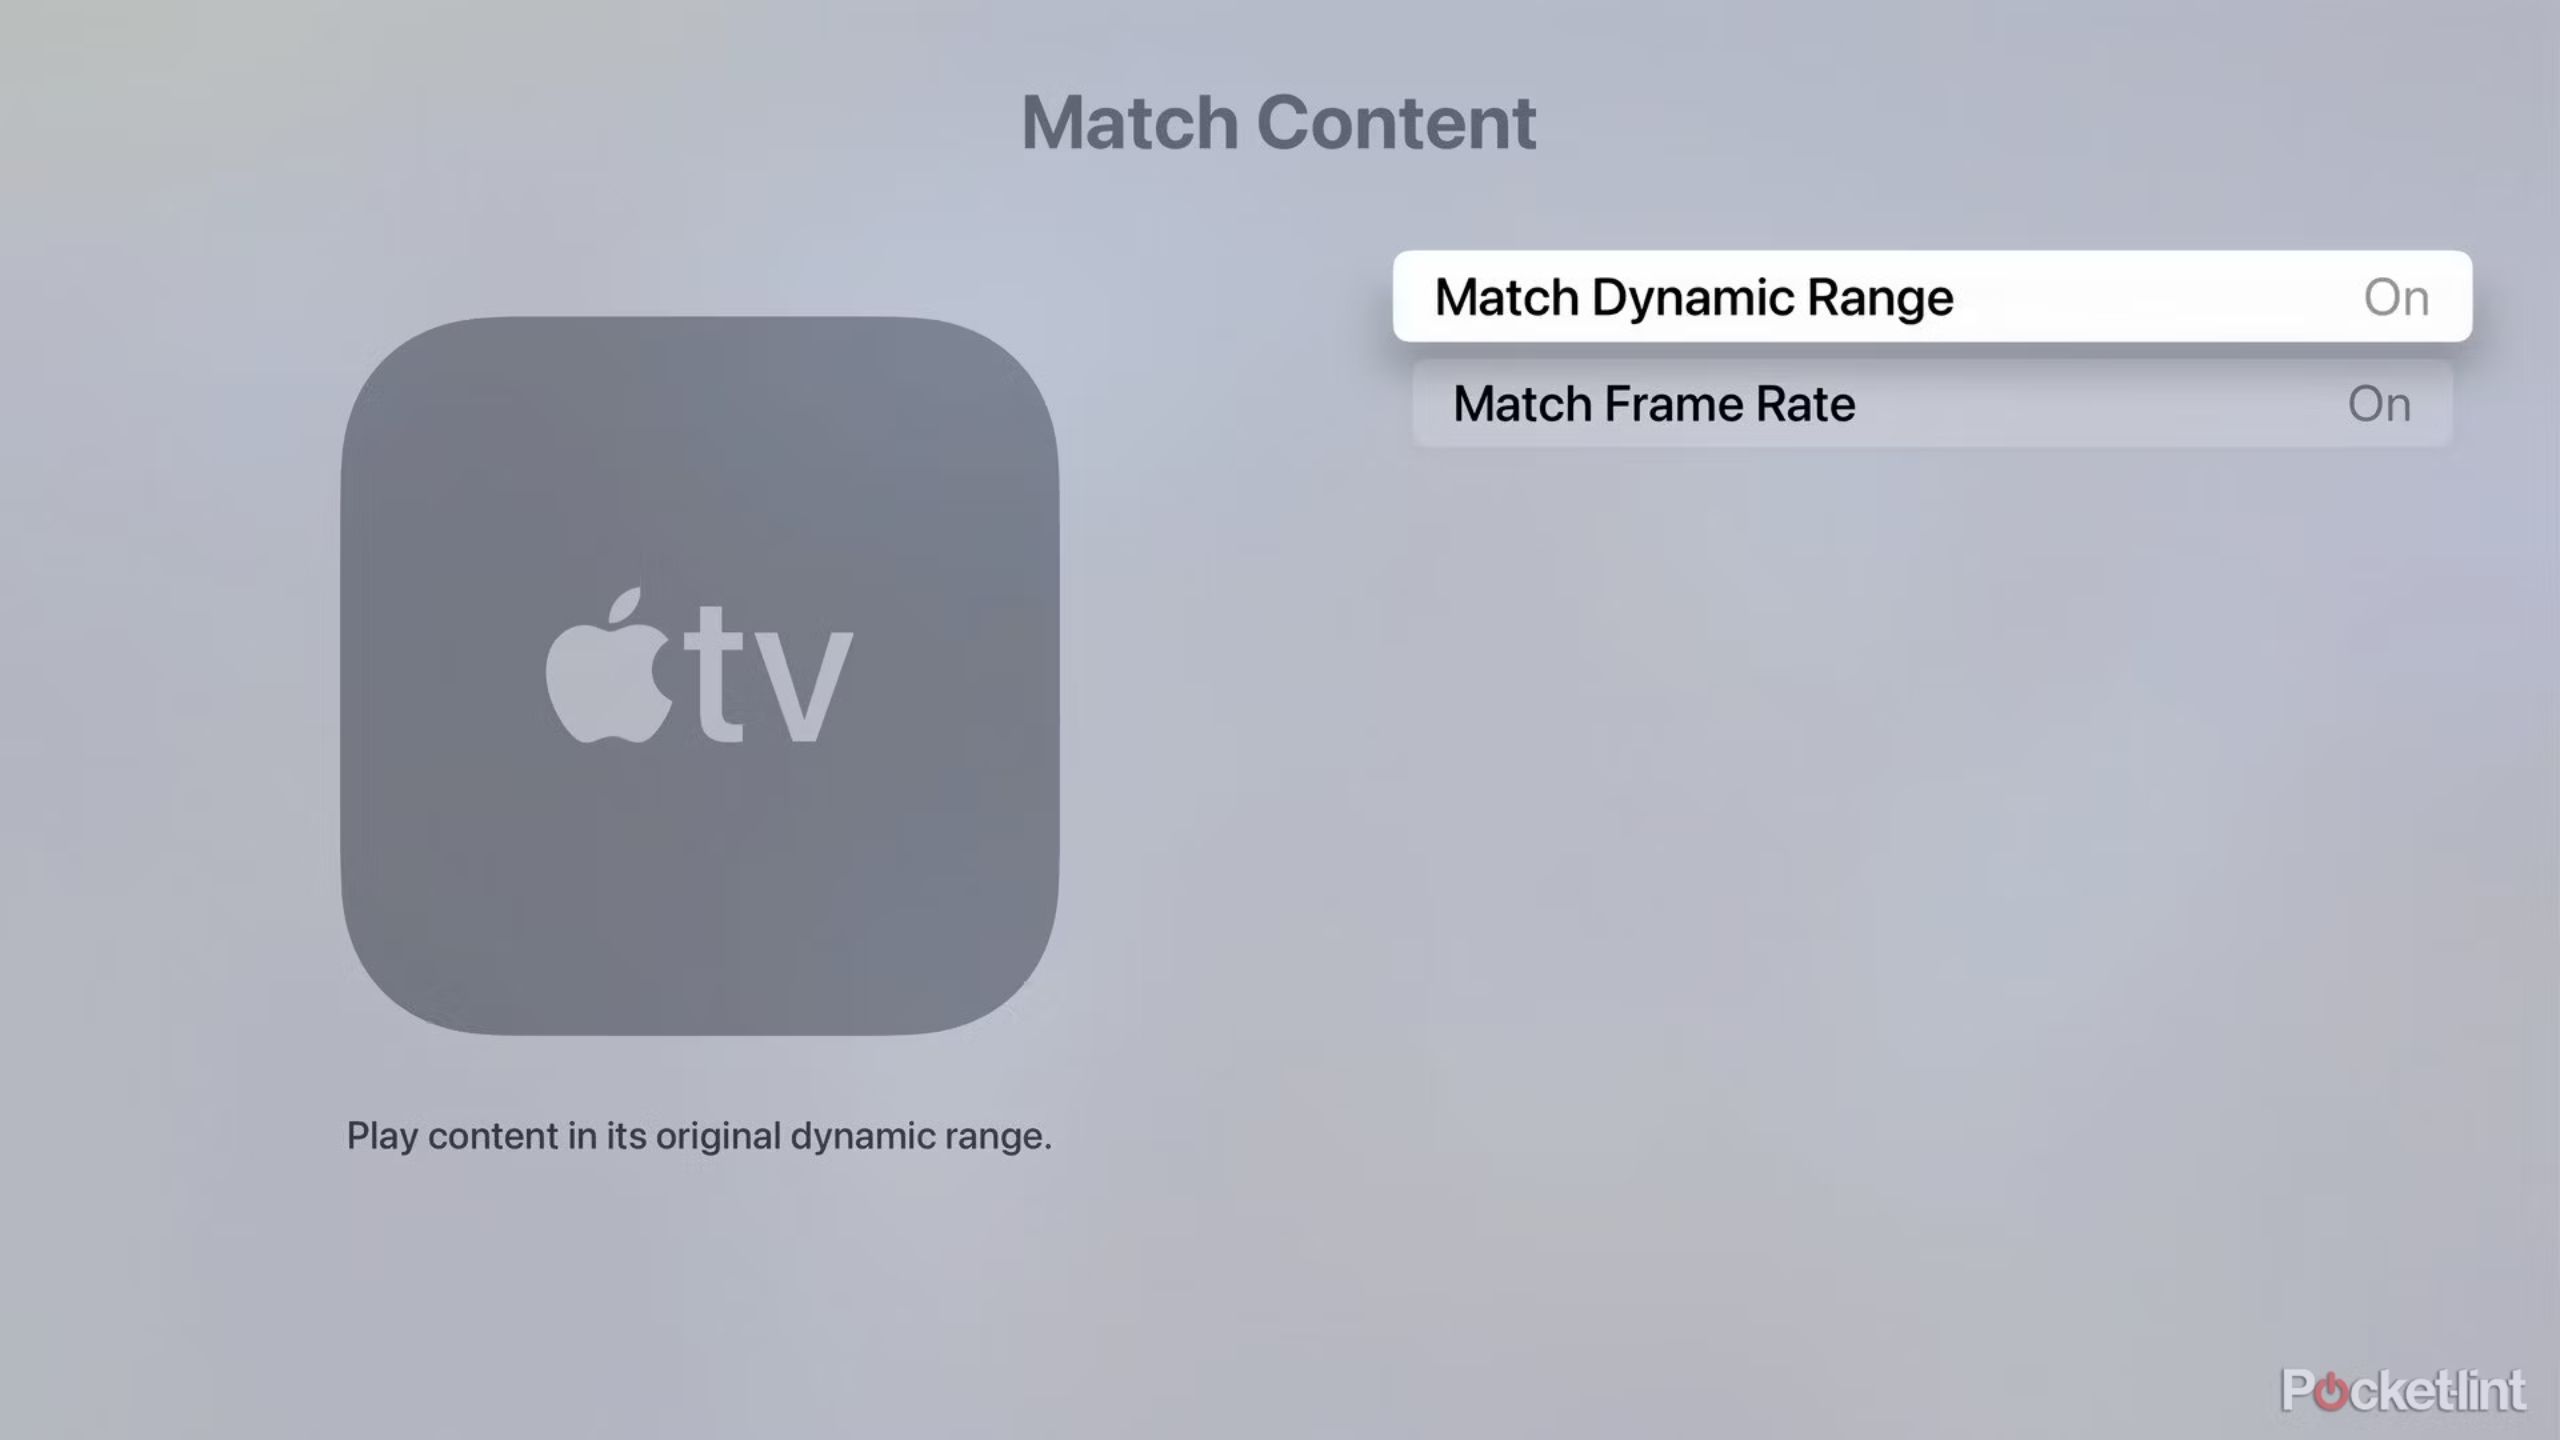 Match Content options in tvOS